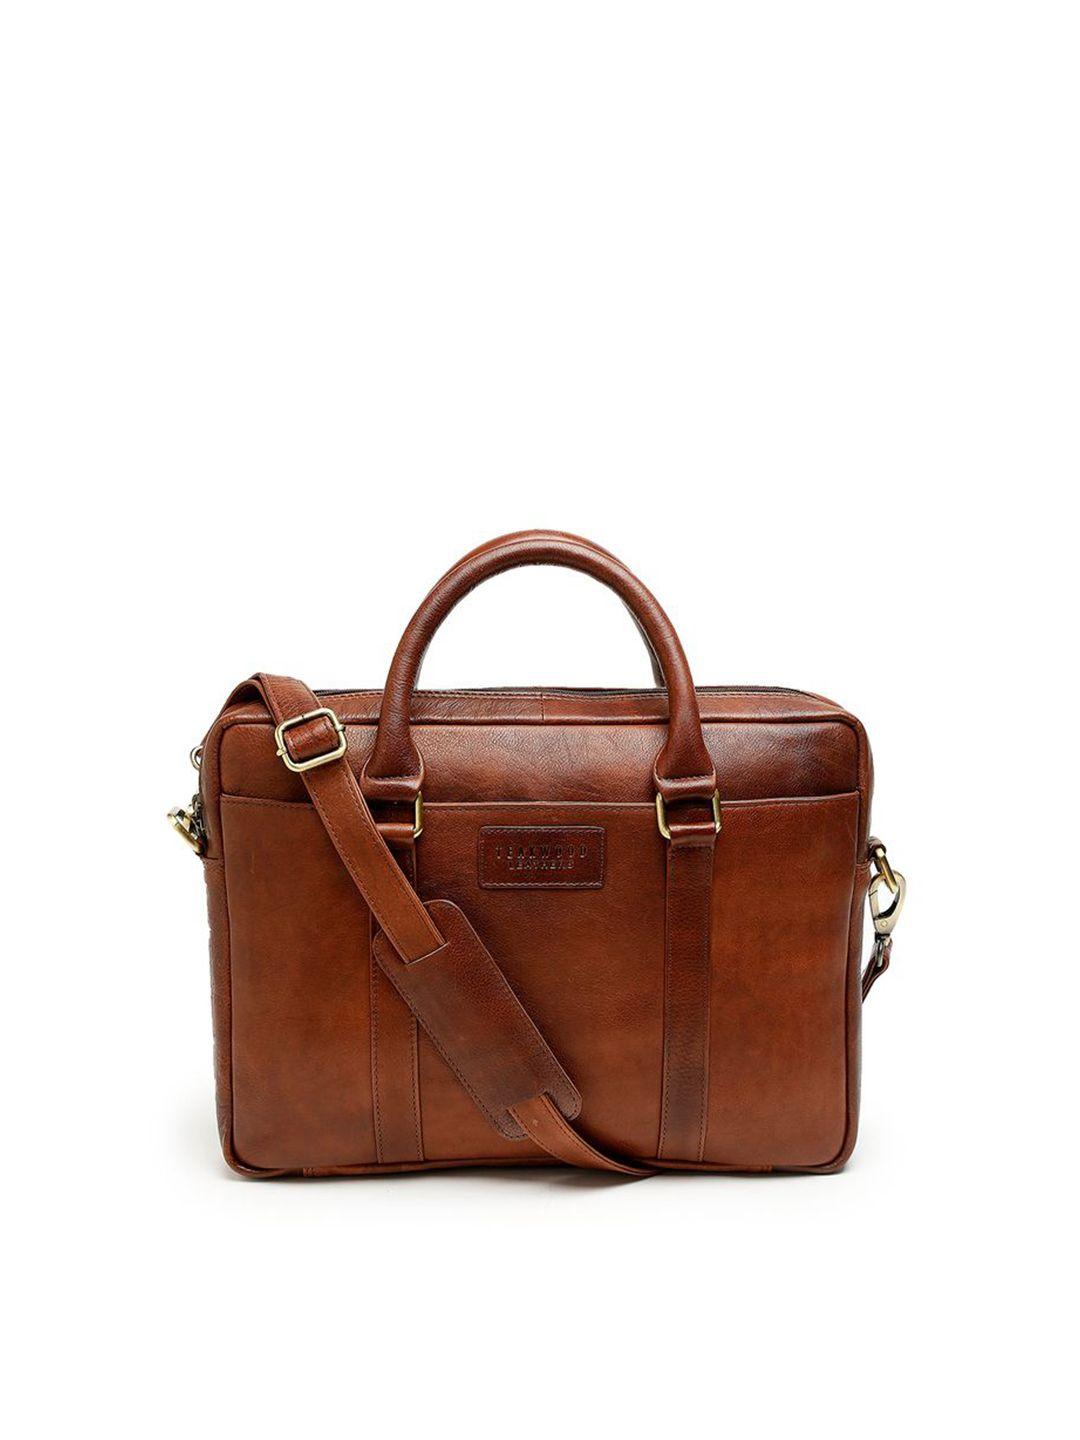 teakwood leathers unisex brown textured leather laptop bag with detachable strap